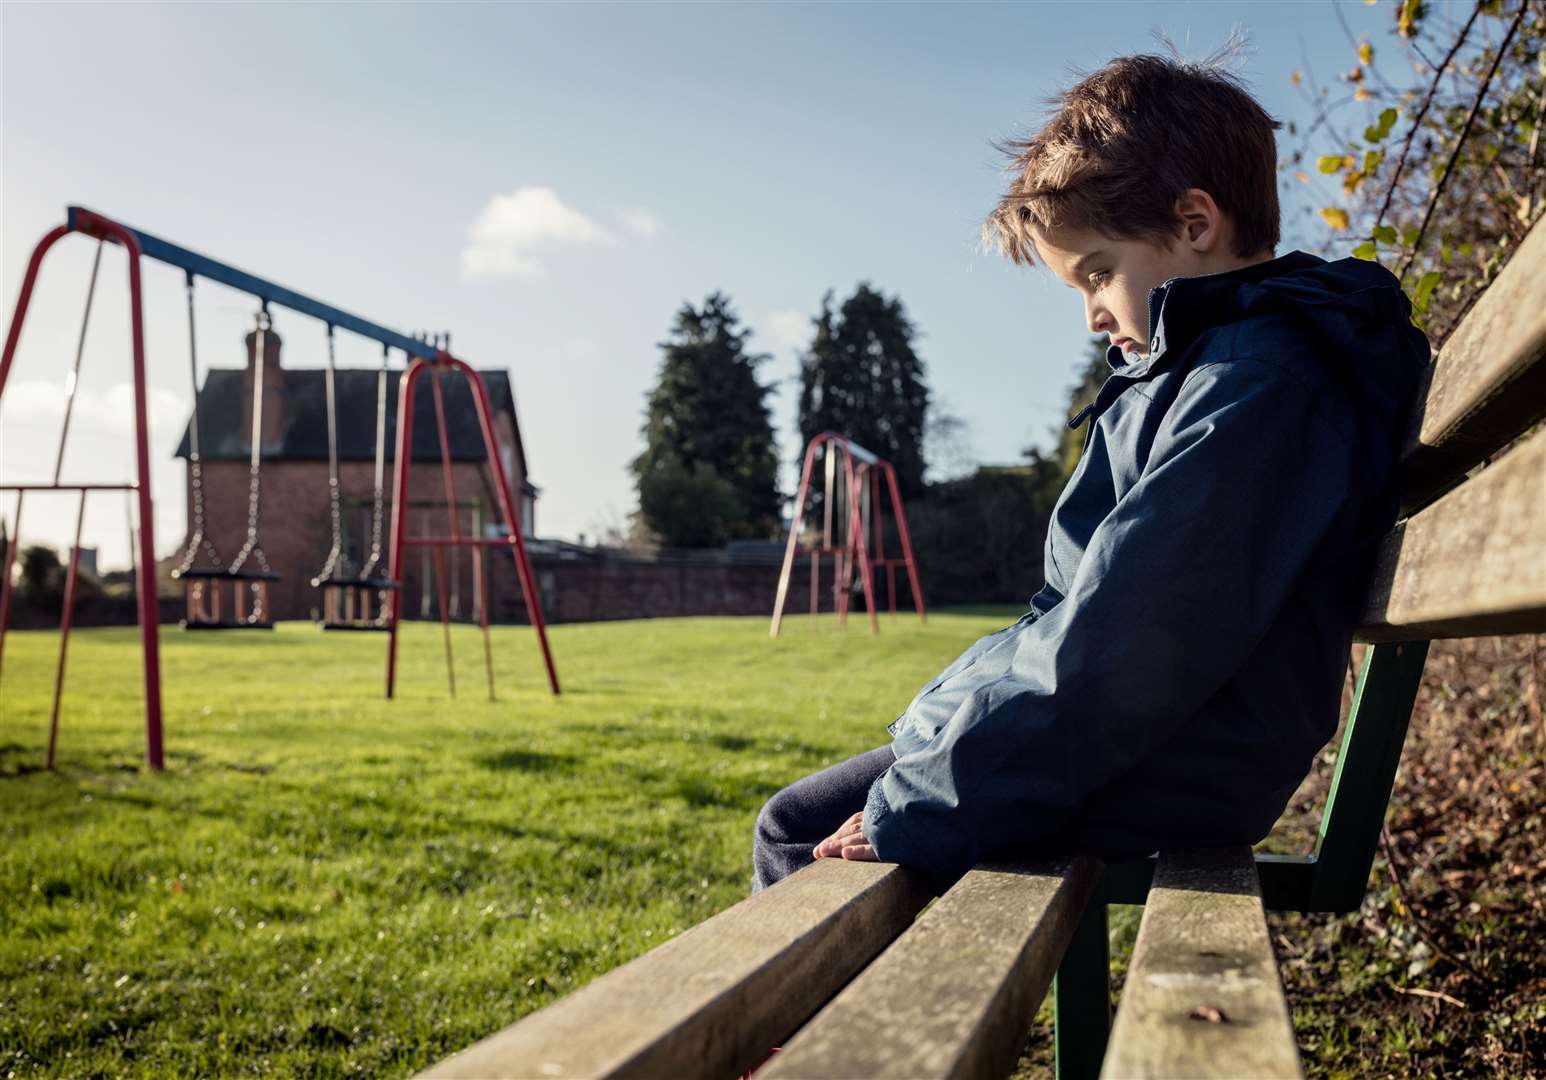 Current laws in England allow for ‘reasonable punishment’. Image: iStock.